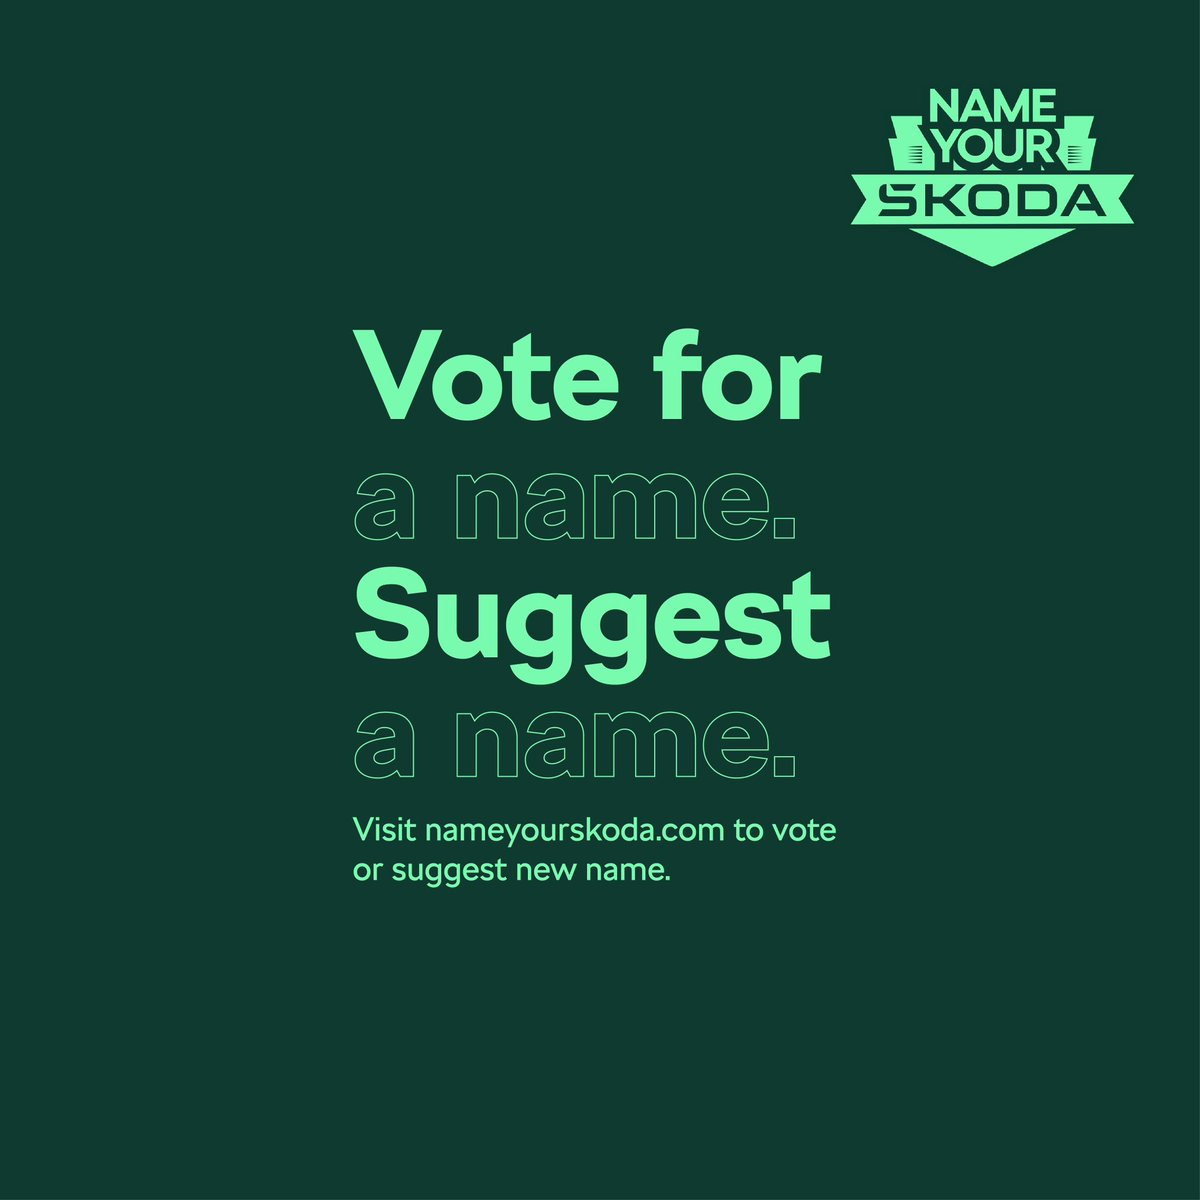 Have your say in shaping the future of Škoda Auto India's Compact SUV! Visit nameyourskoda.com to vote for your favorite shortlisted name or suggest a new one! Every voice counts in this exciting journey. Let's make history together! #NameYourSkoda